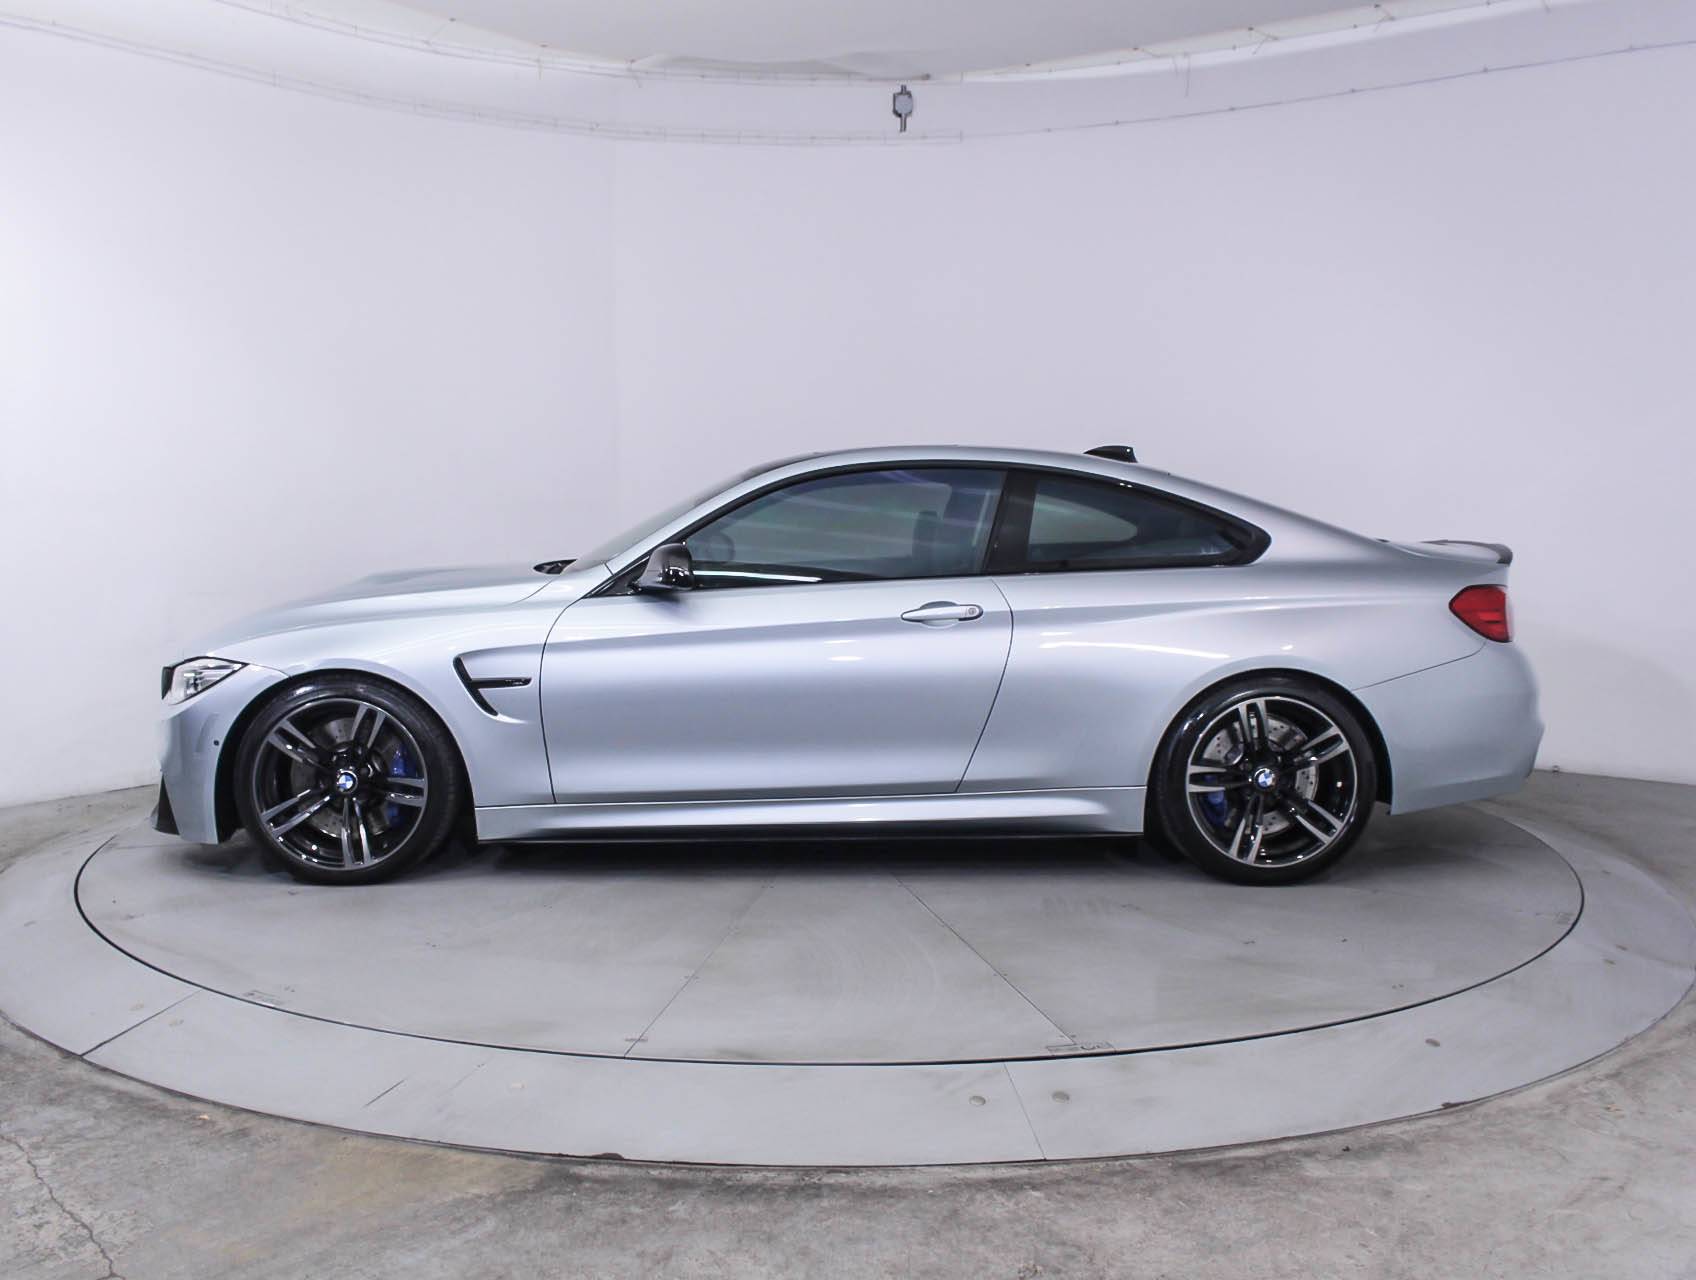 Used 2016 Bmw M4 Coupe For Sale In Hollywood Fl 88423 Florida Fine Cars